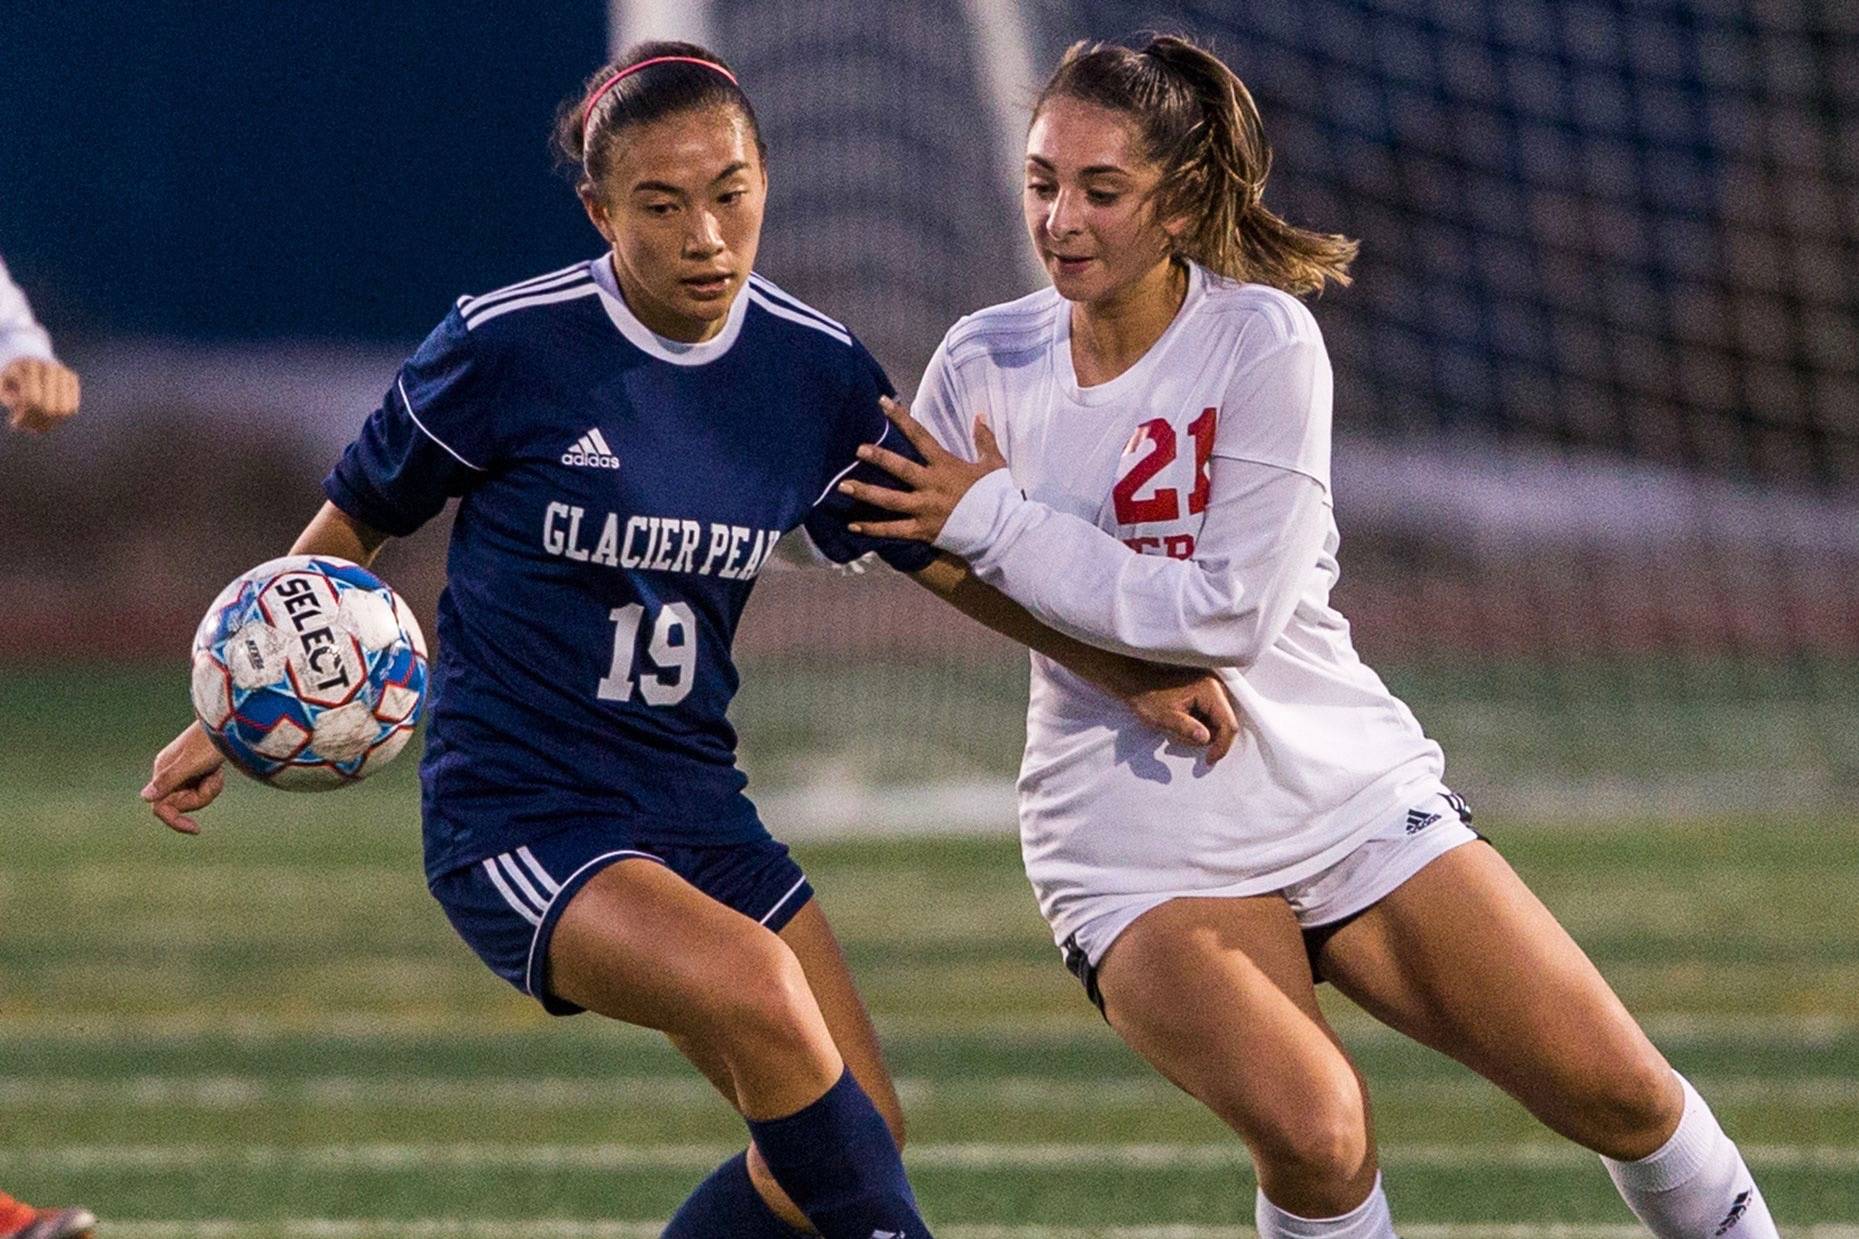 Emily Strong (left) and Glacier Peak host perennial power Jackson in a pivotal Wesco 4A girls soccer match Tuesday night. (Olivia Vanni / The Herald)